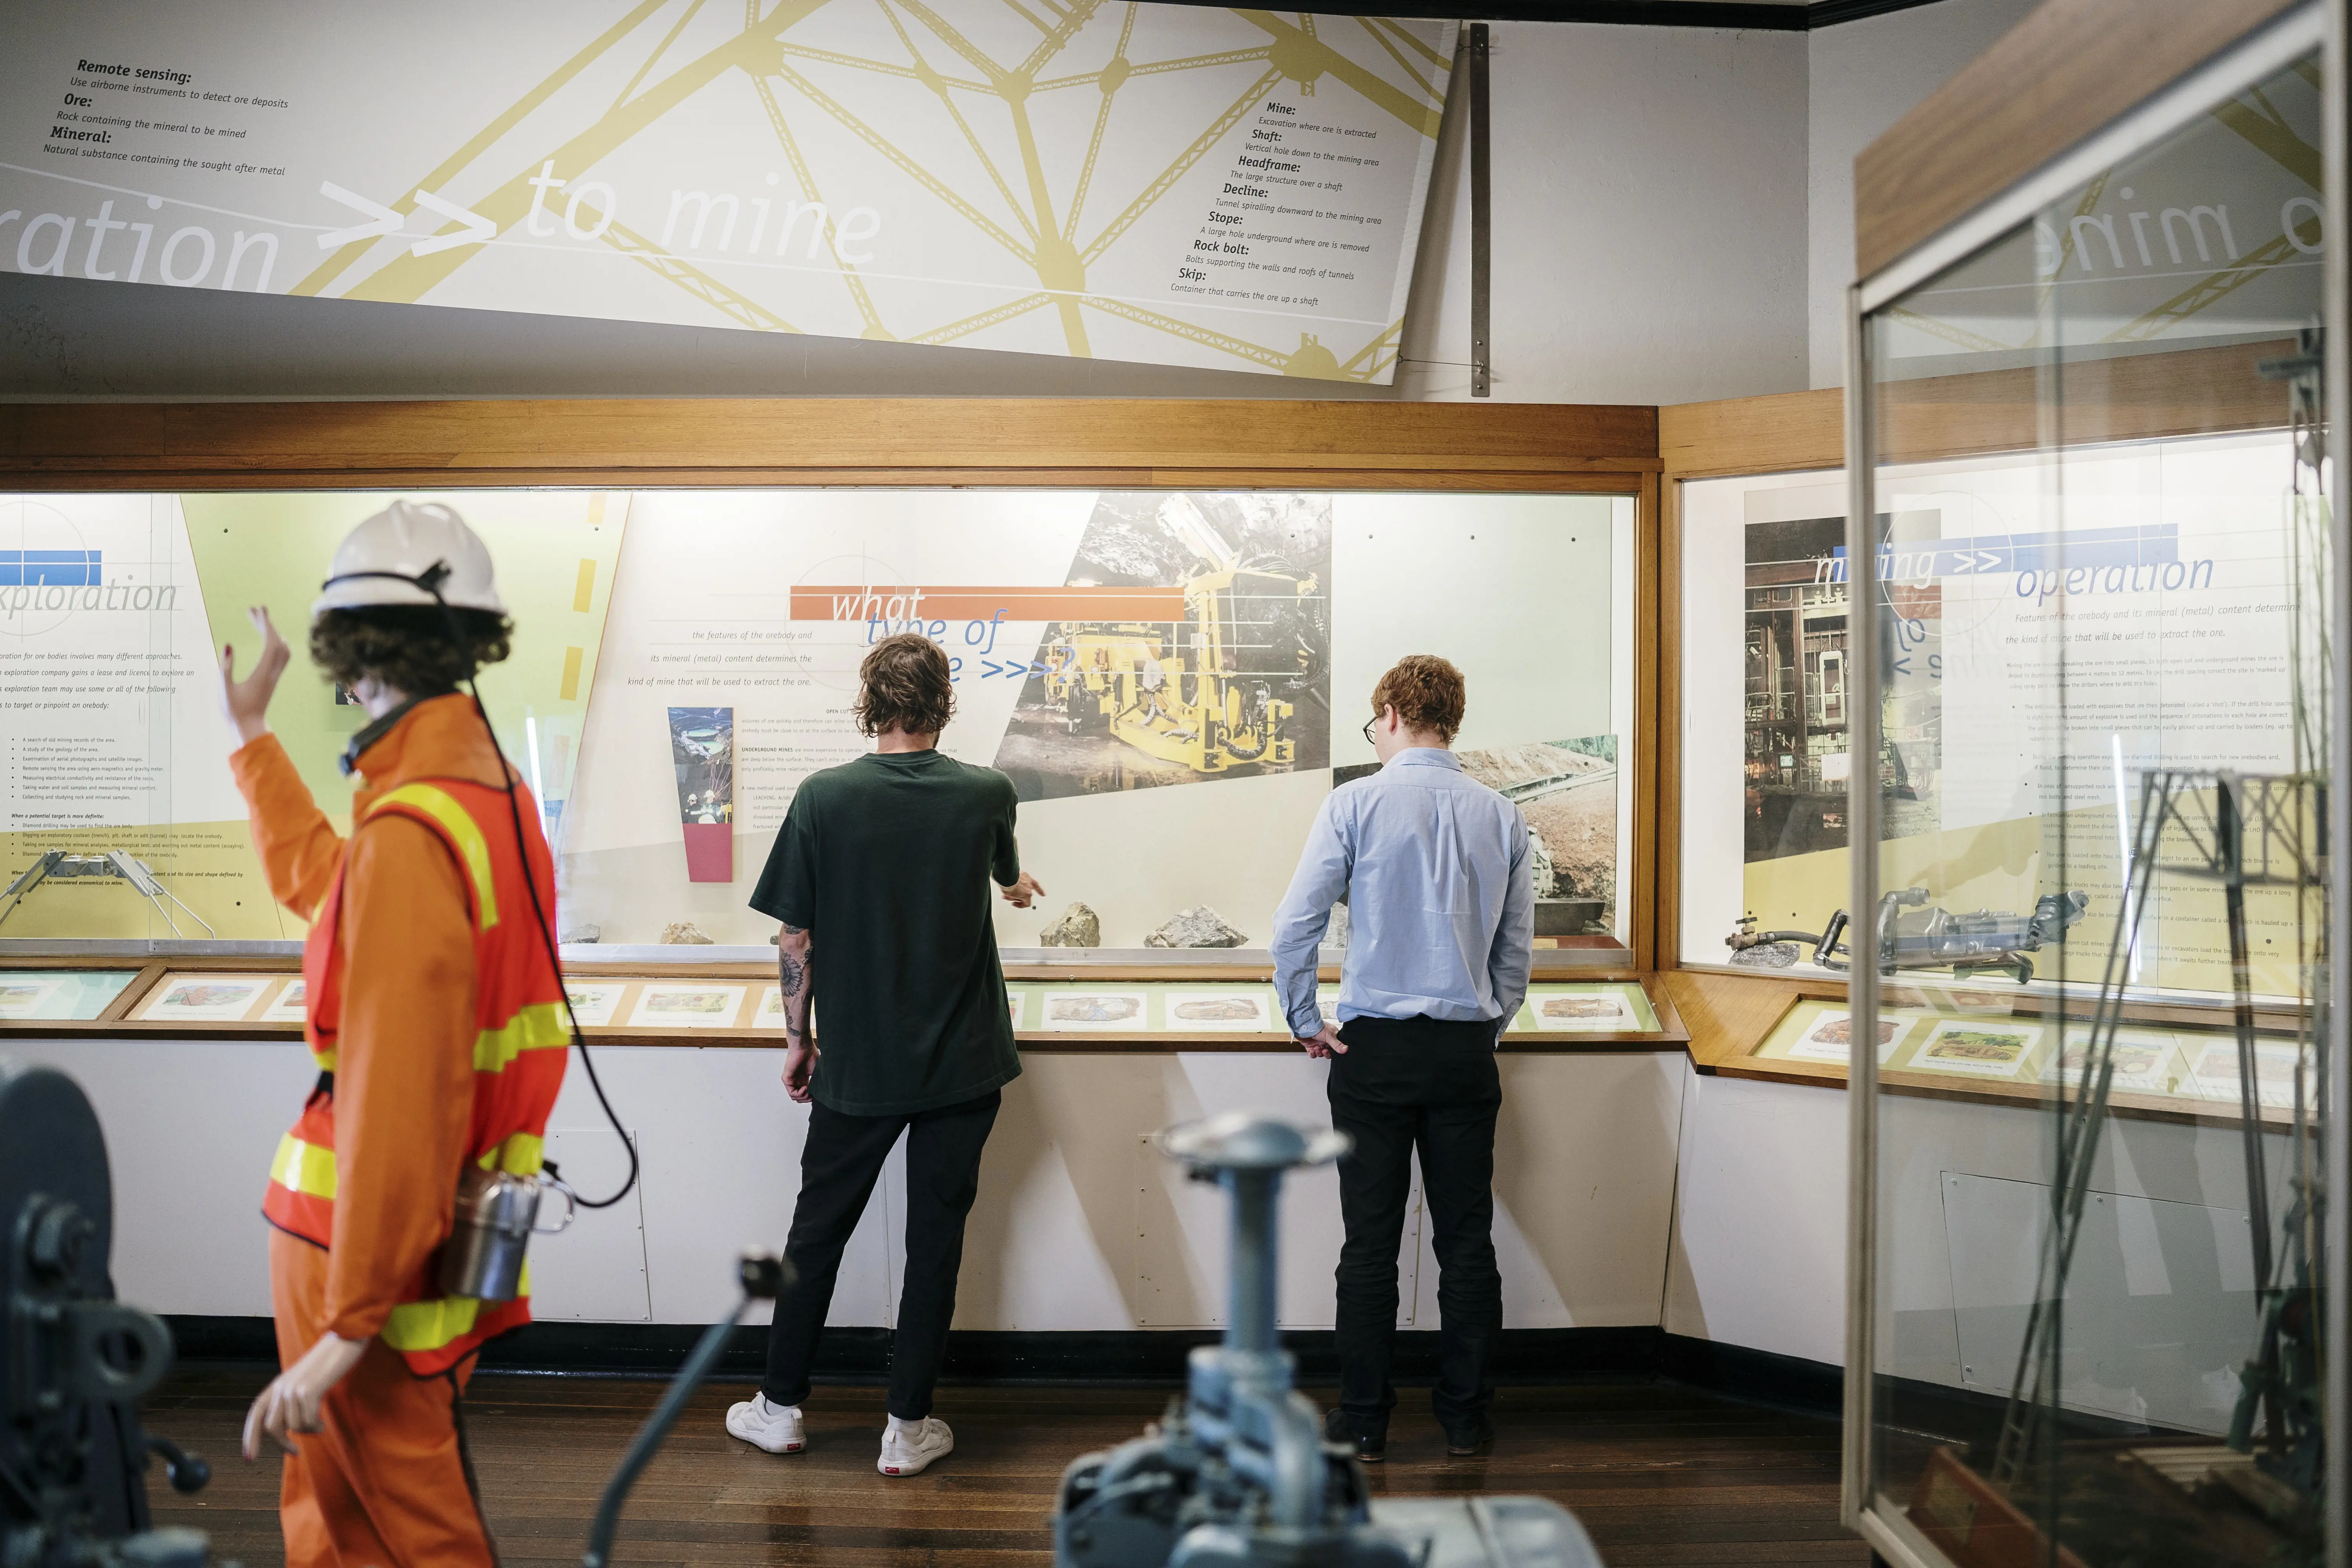 Two young men walk through an exhibition on mining, with posters, manikins dressed in safety equipment and small scale models of mining infrastructure.